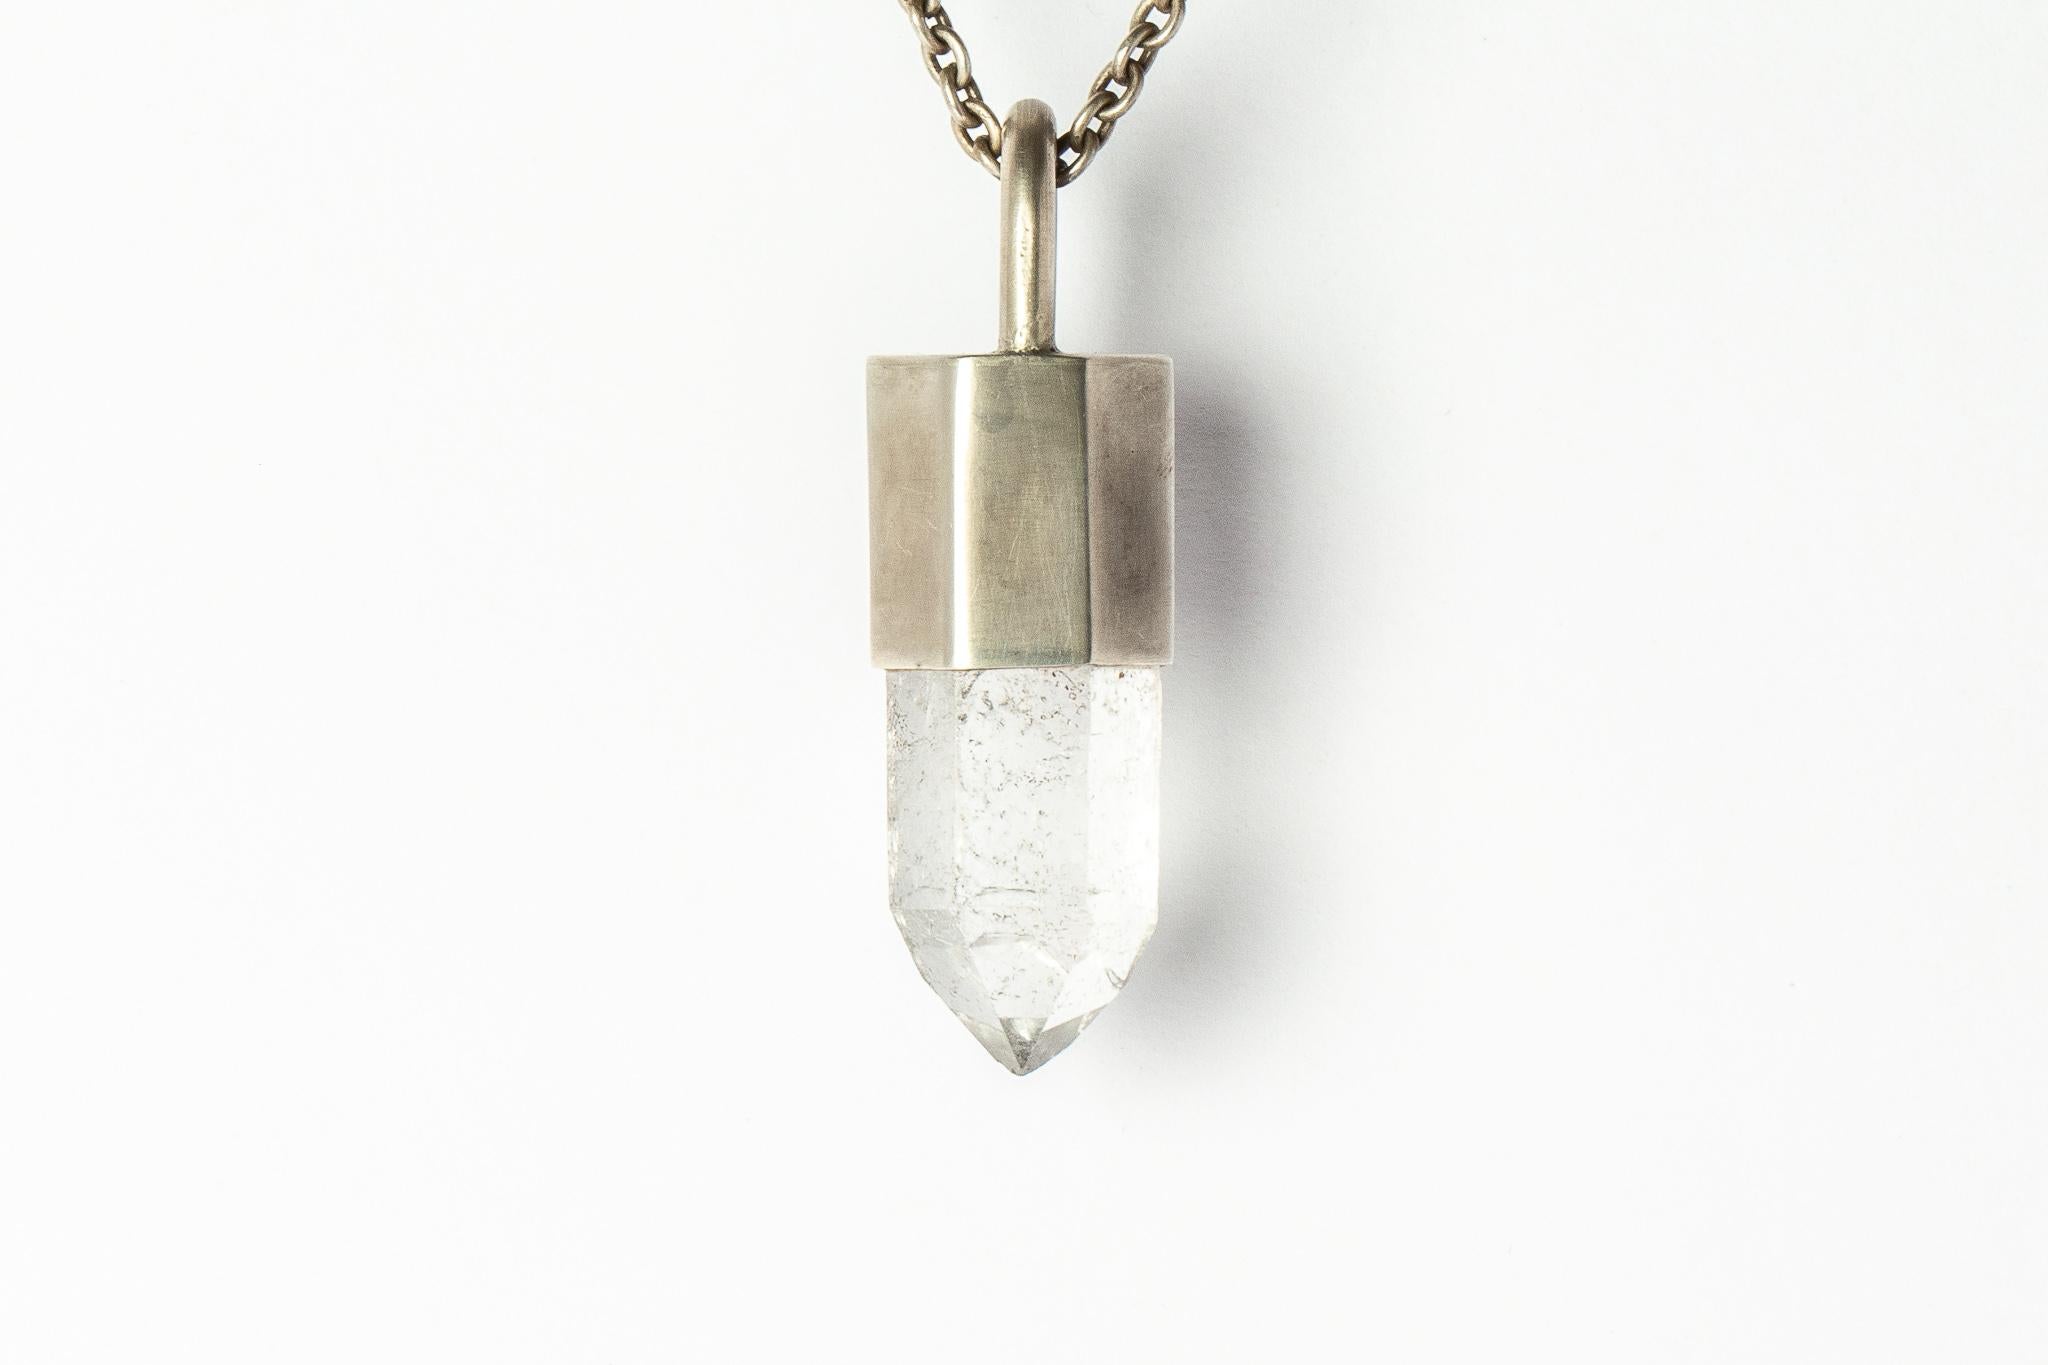 Pendant necklace in acid treated sterling silver and a rough of misc quartz. It comes on 74 cm sterling silver chain.
The Talisman series is an exploration into the power of natural crystals. The crystals used in these pieces are discovered through